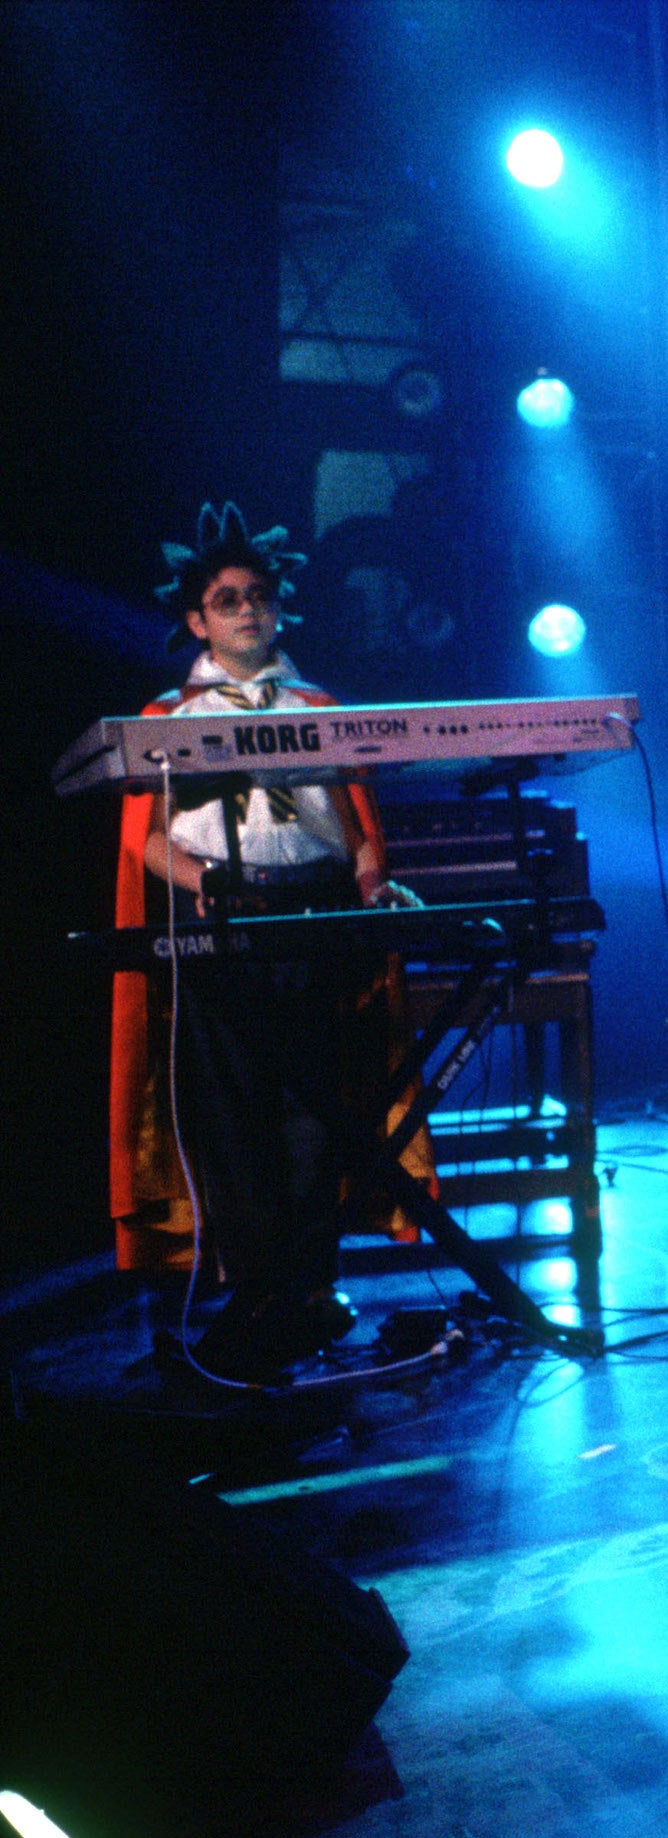 Lawrence plays piano on stage with the band